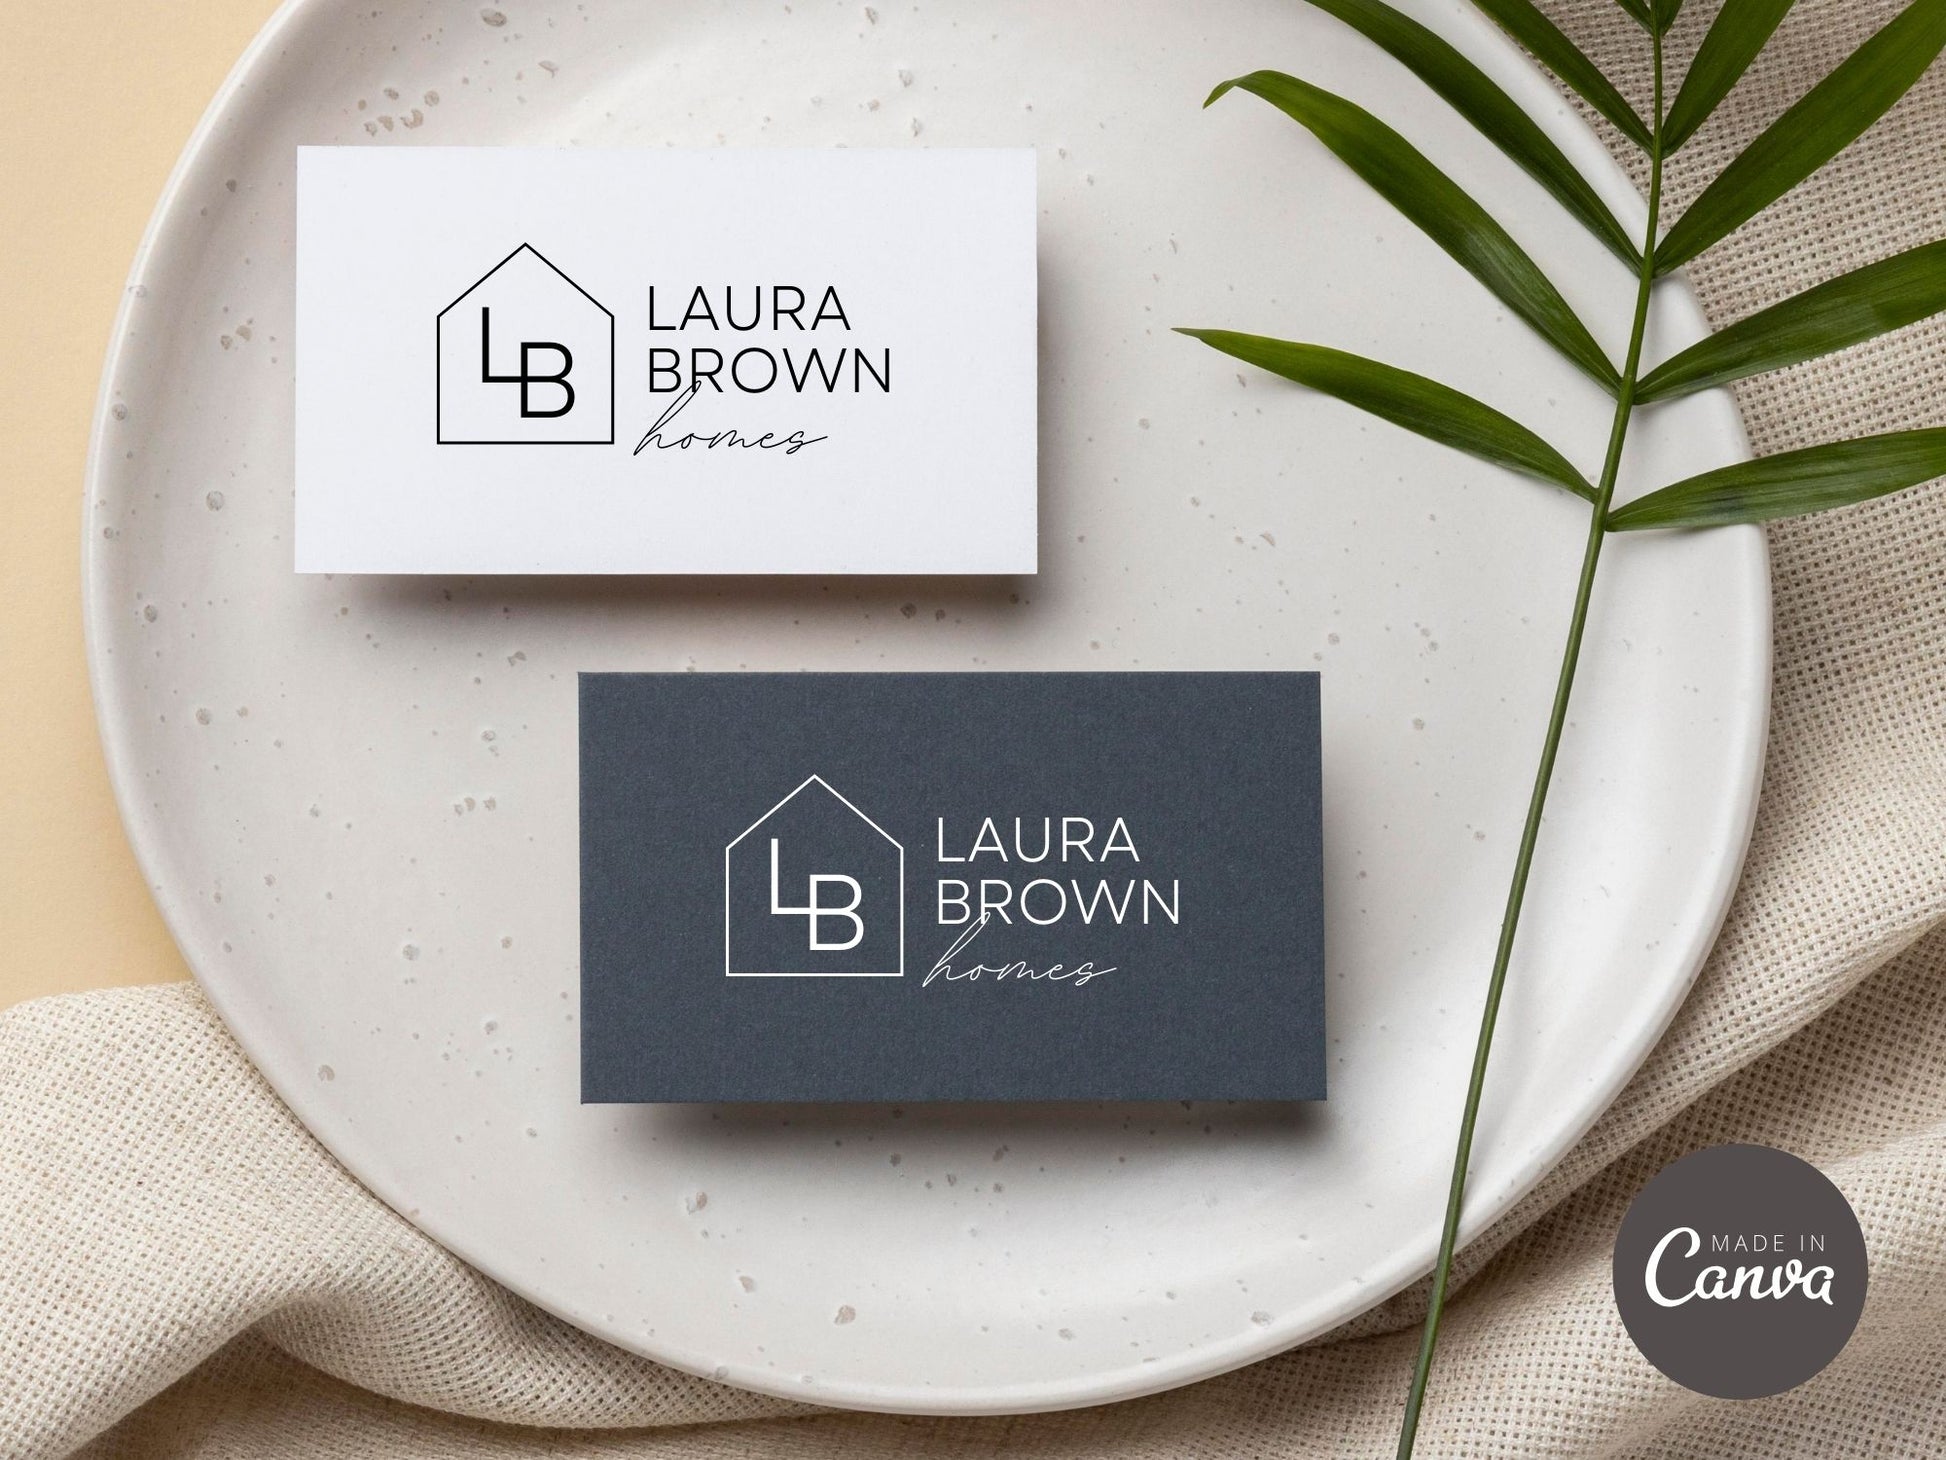 Laura Brown Homes Logo Template - Distinctive and personalized logo designed for stylish real estate professionals.